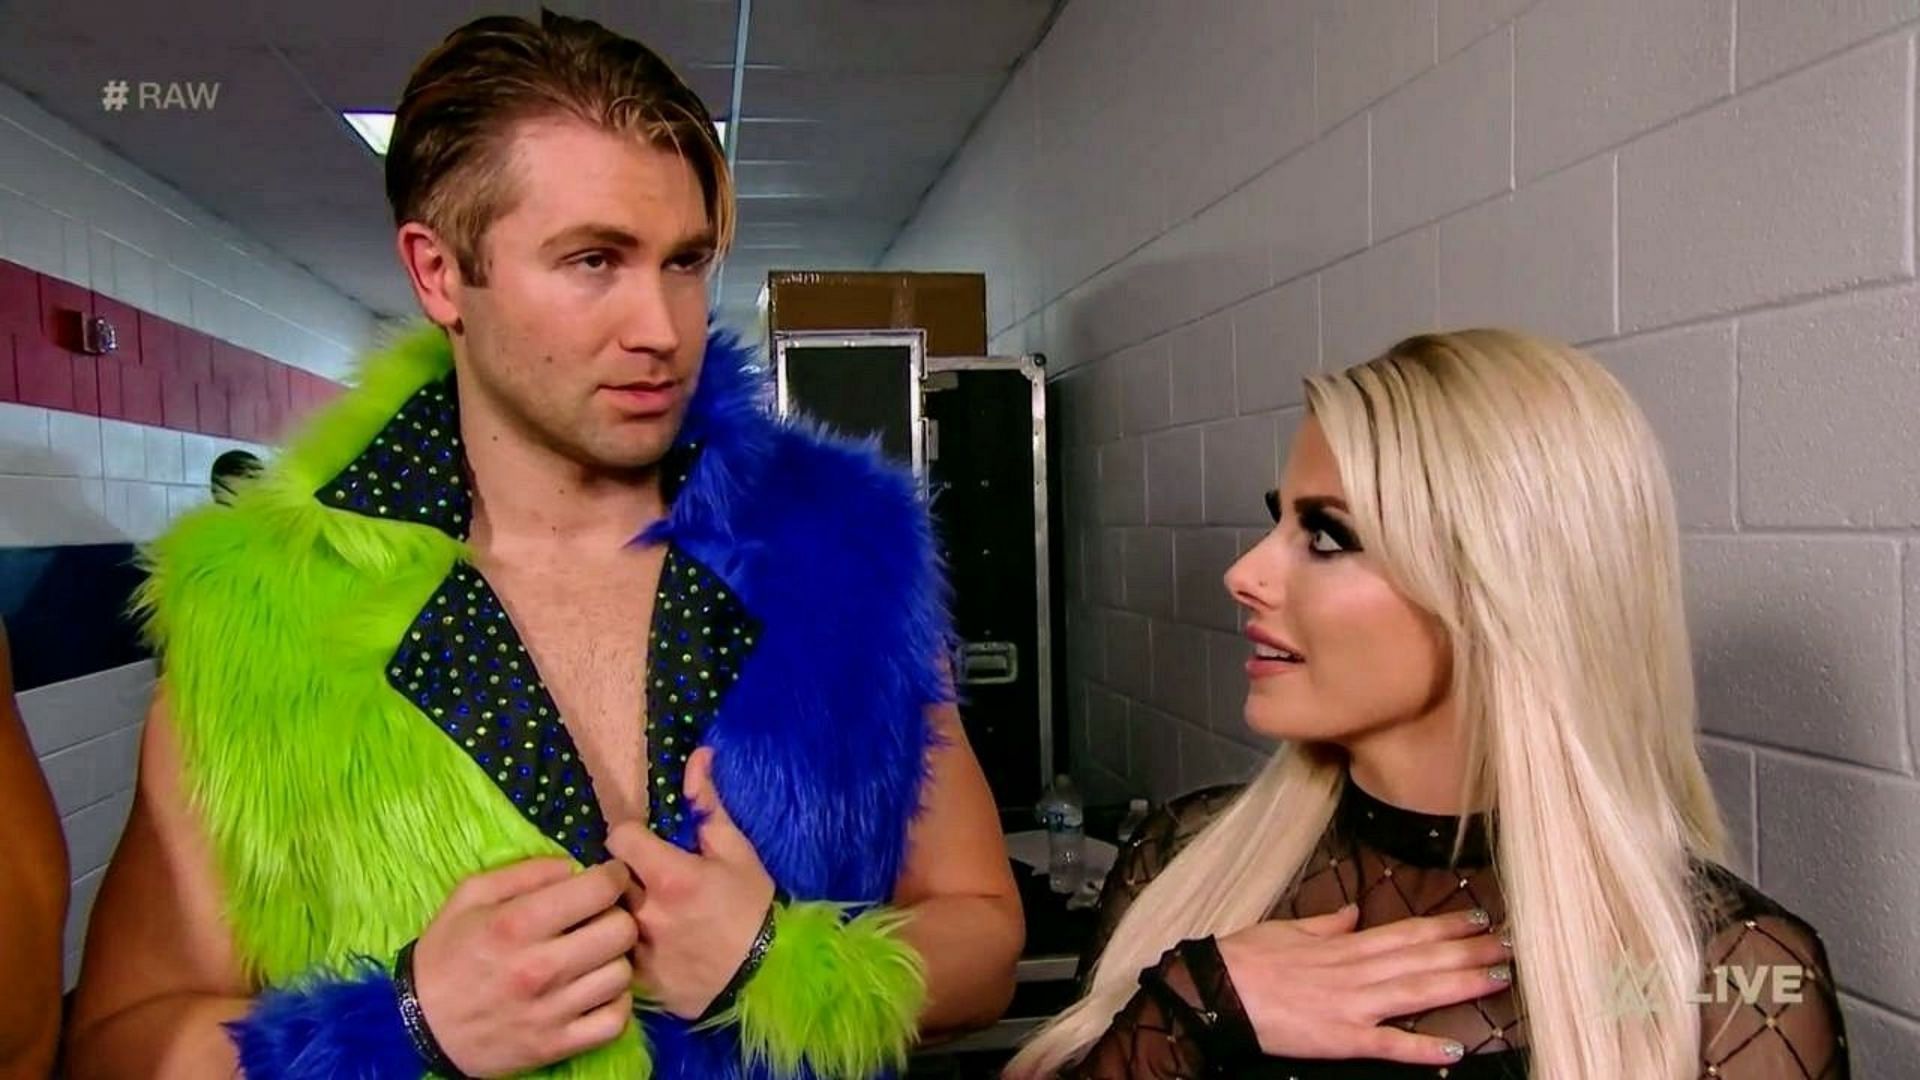 Rumors suggested that Alexa Bliss and Tyler Breeze dated in 2019